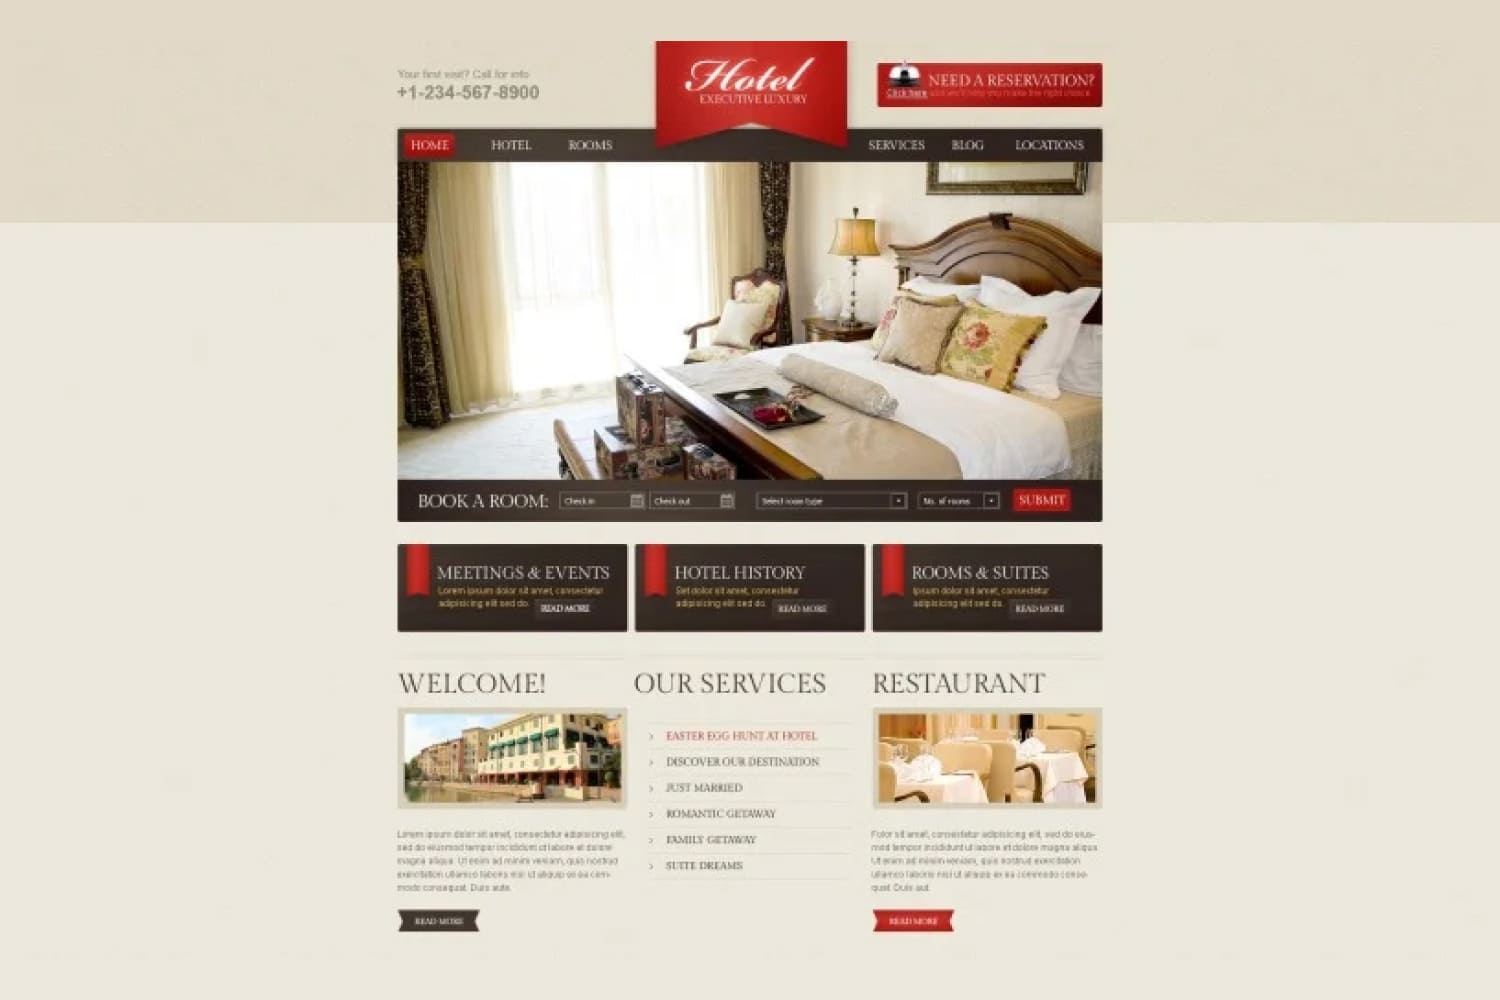 The main page of the hotel website with a photo of the room, service blocks and a restaurant.